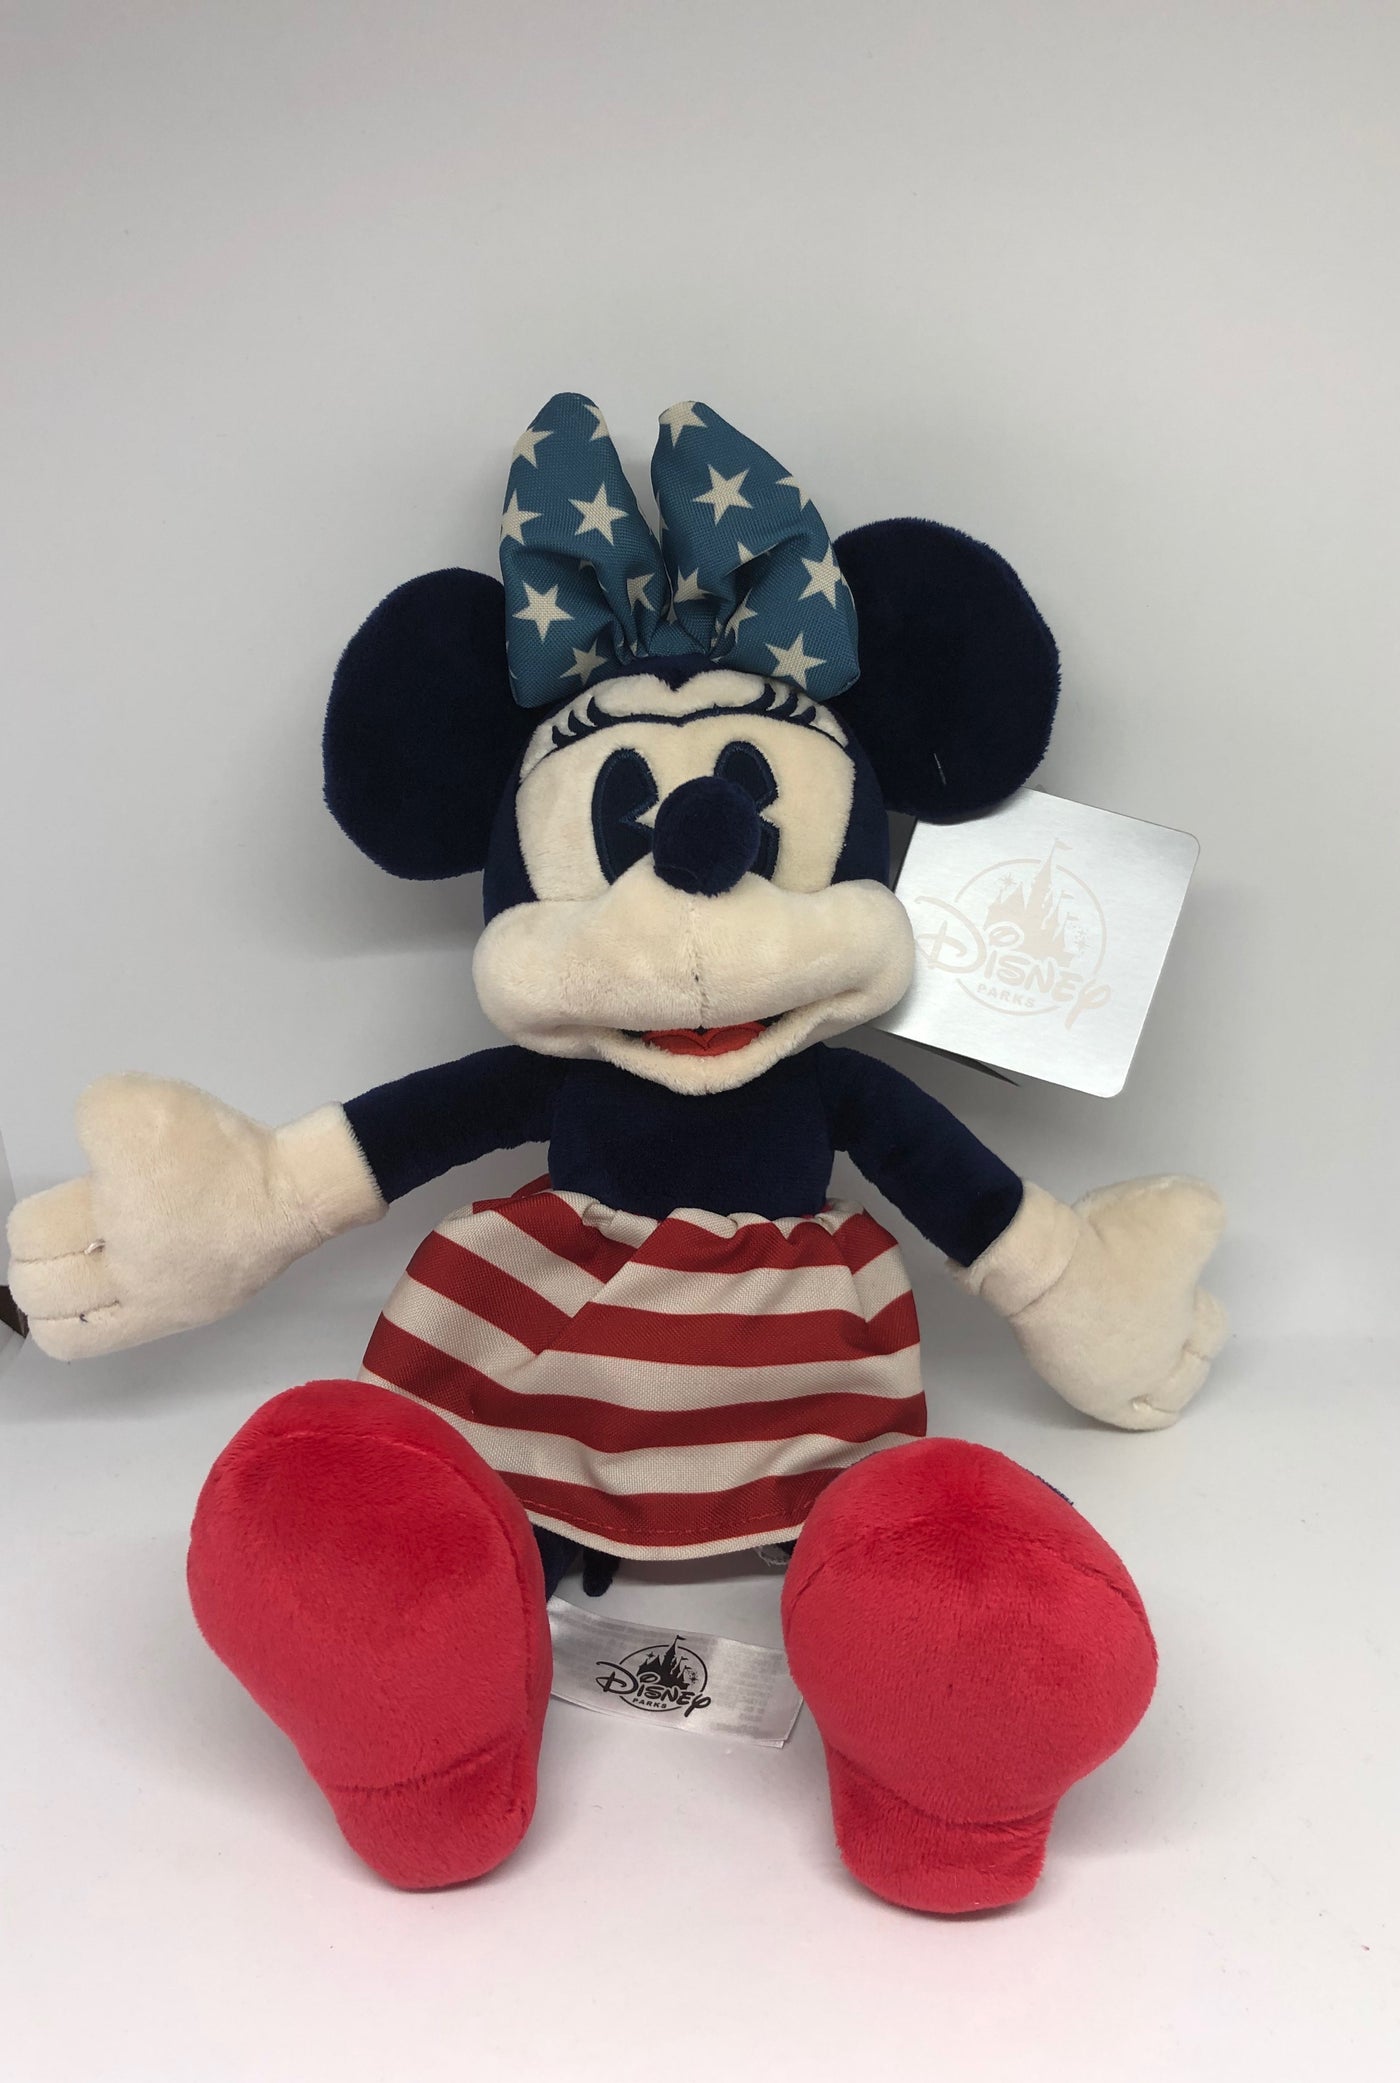 Disney Parks 11inc Mamer Minnie Mouse Americana Plush New with Tags